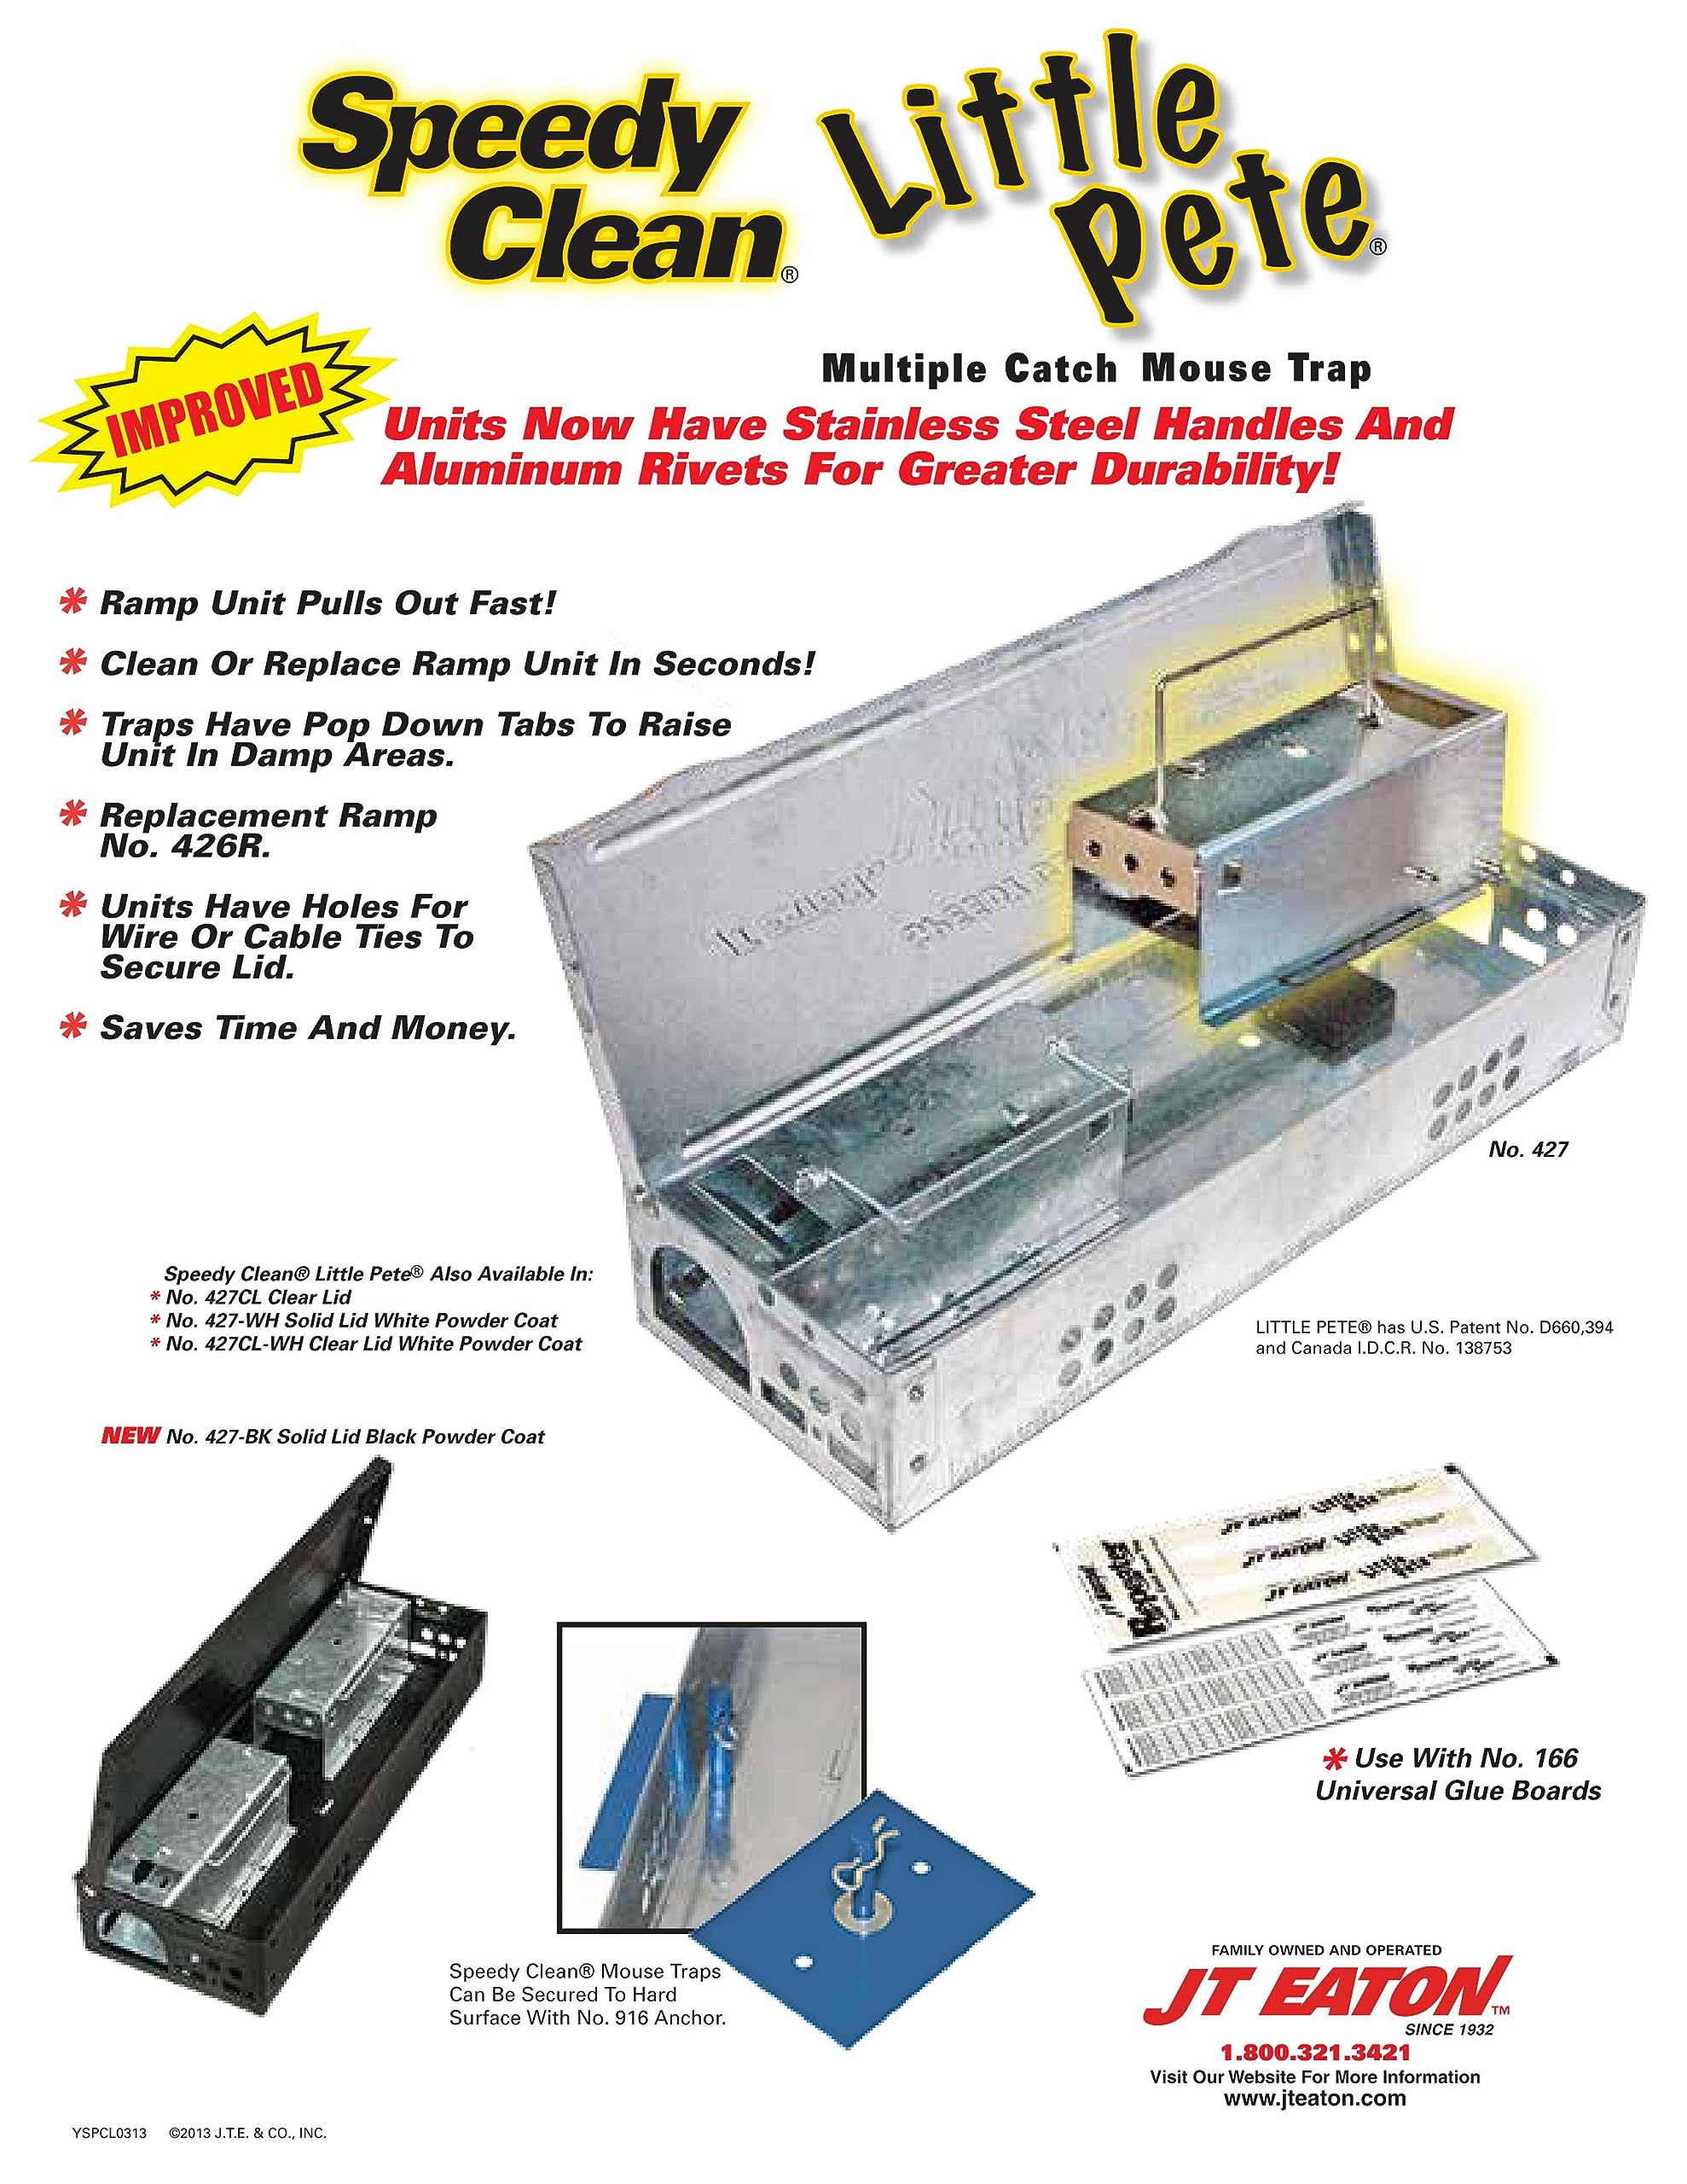 J T Eaton 427CL Speedy Clean Little Pete Extra Narrow Multi Catch Mouse Trap with Clear Inspection Window and Quick Ramp Compatible, Metal